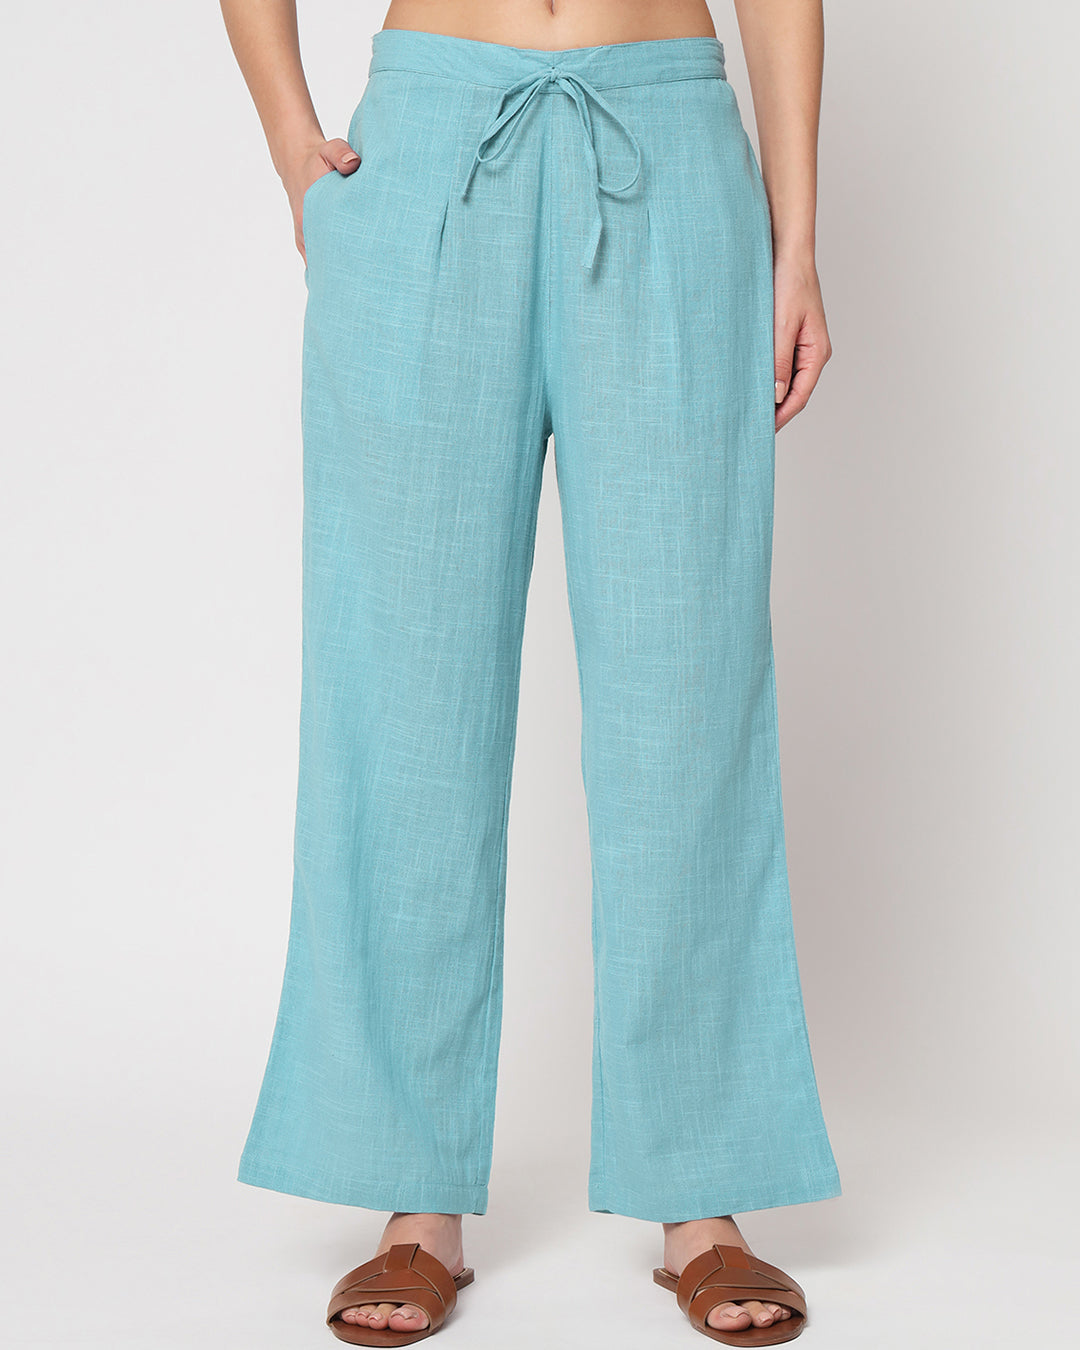 Combo: Blue Breeze & Forest Green Straight Pants- Set of 2